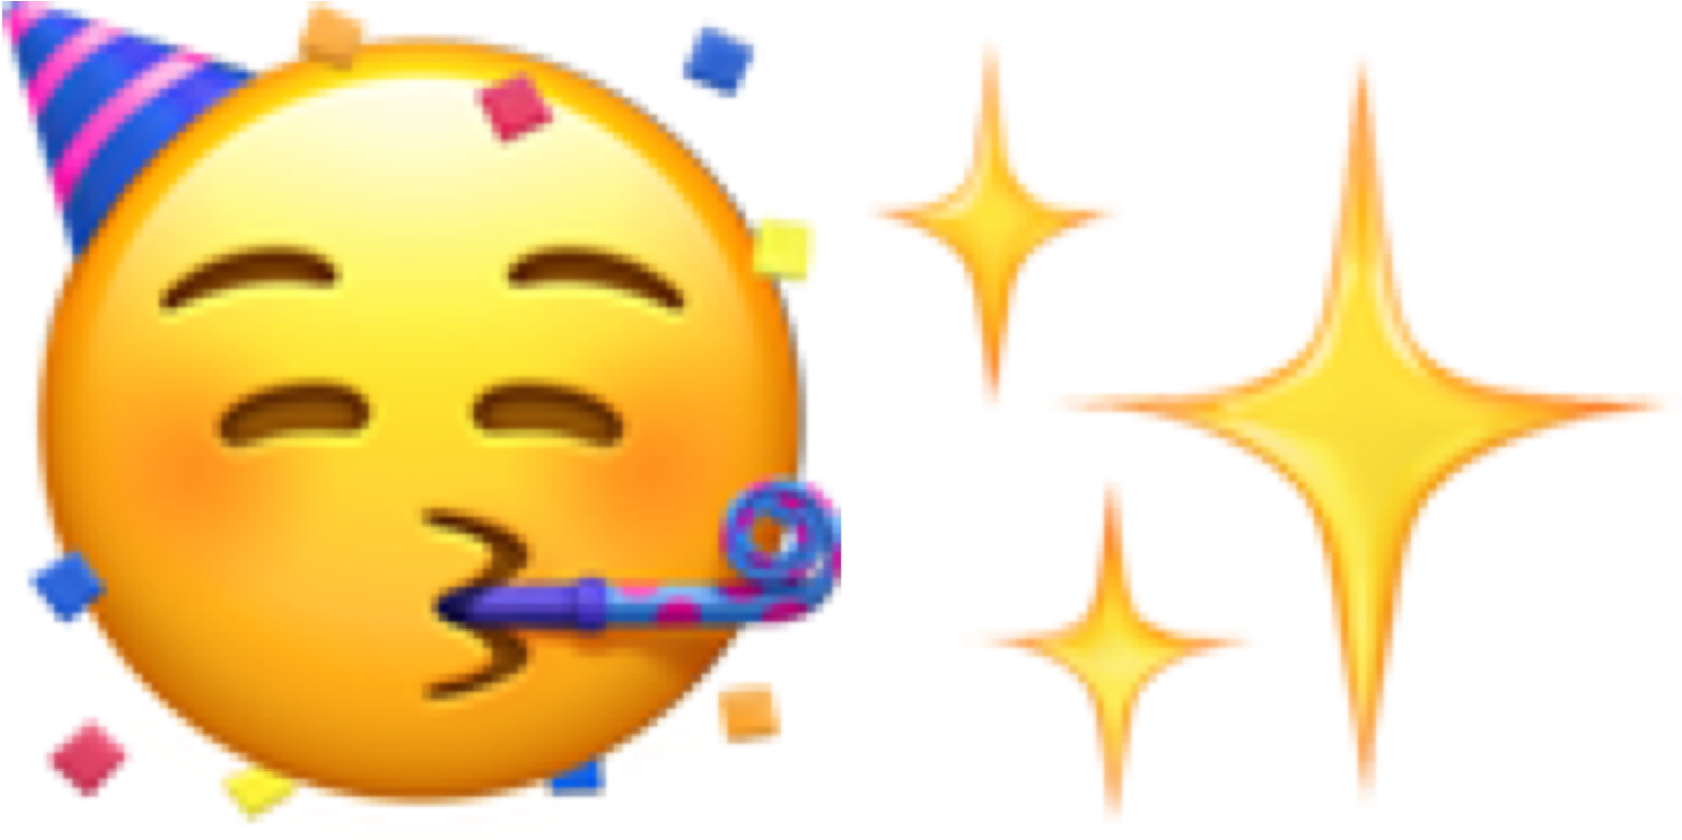 A Yellow Emoji Blowing A Party Horn